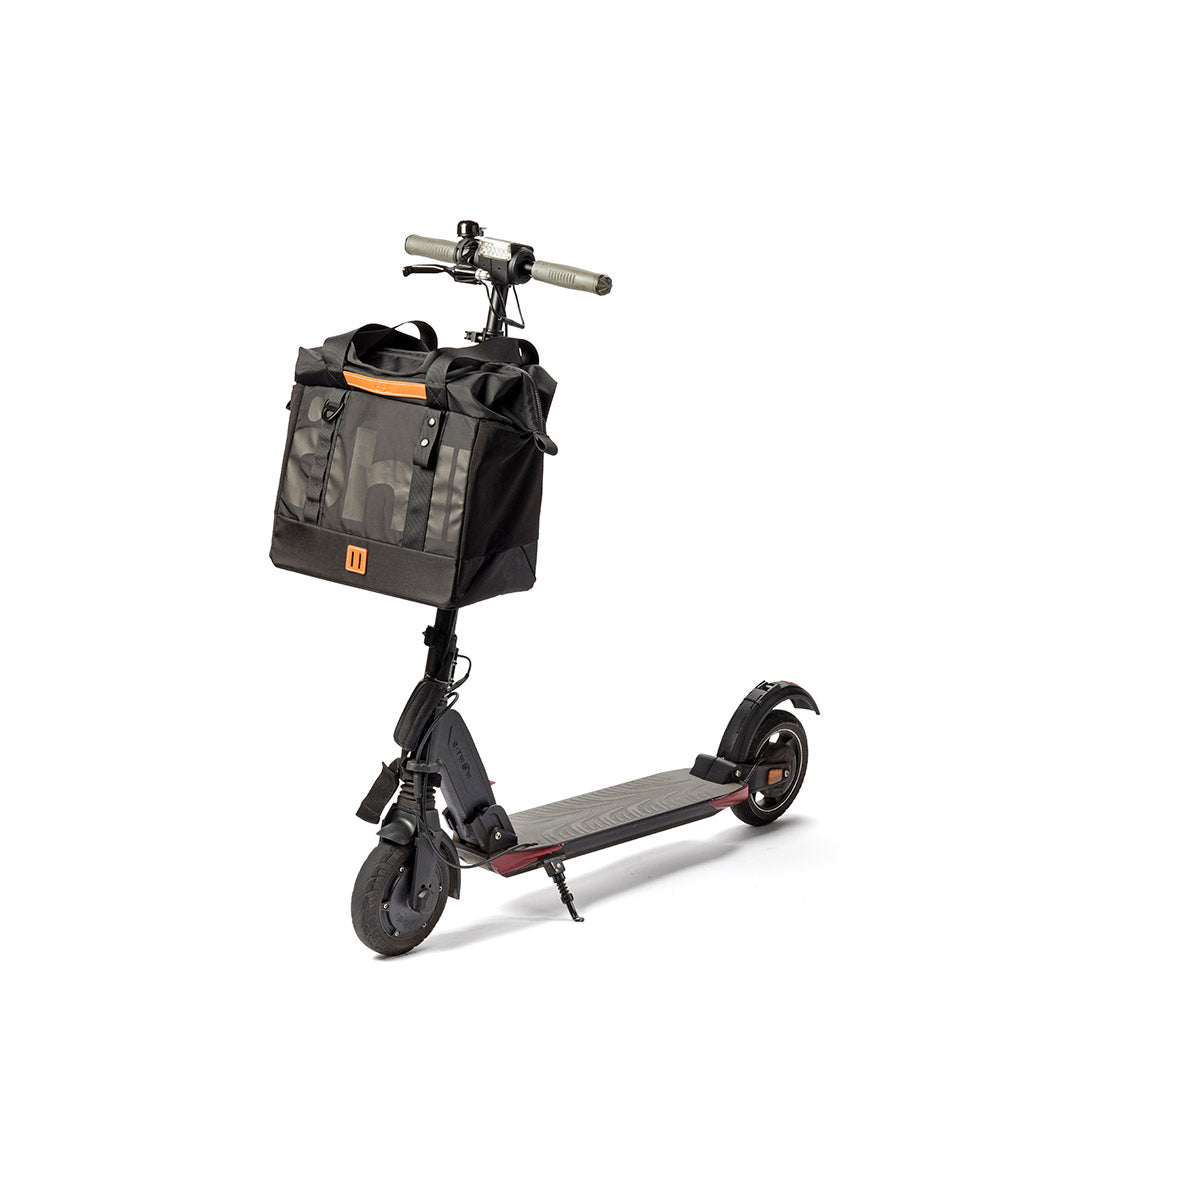 E-scooter with the Öhll-in bag in black (e-scooter E-twow GT)